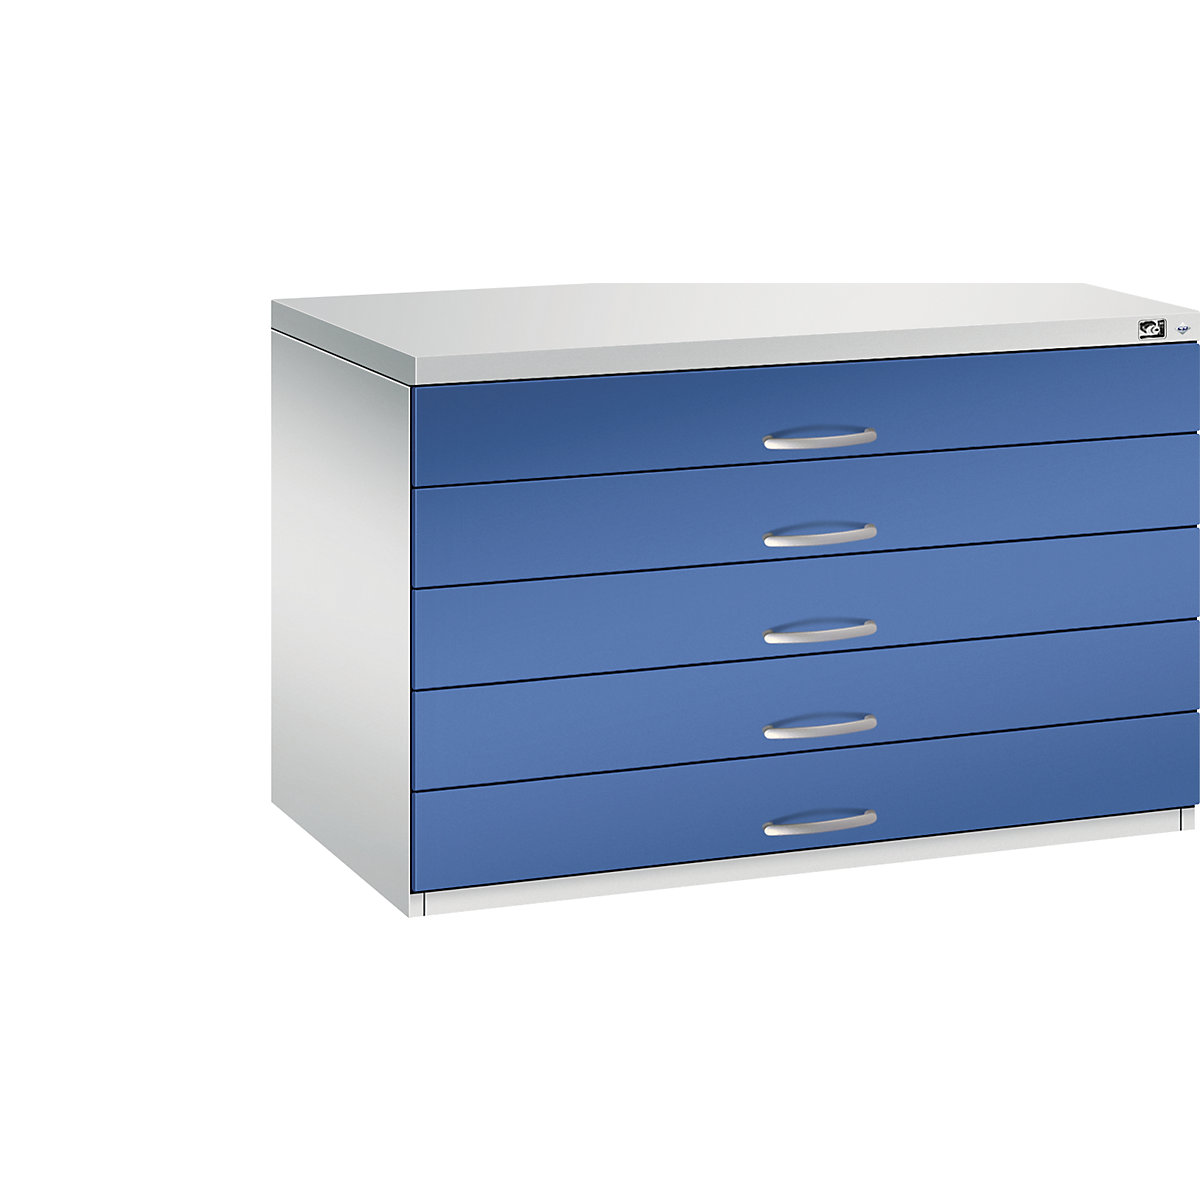 Drawing cabinet – C+P, A1, 5 drawers, height 760 mm, light grey / gentian blue-16